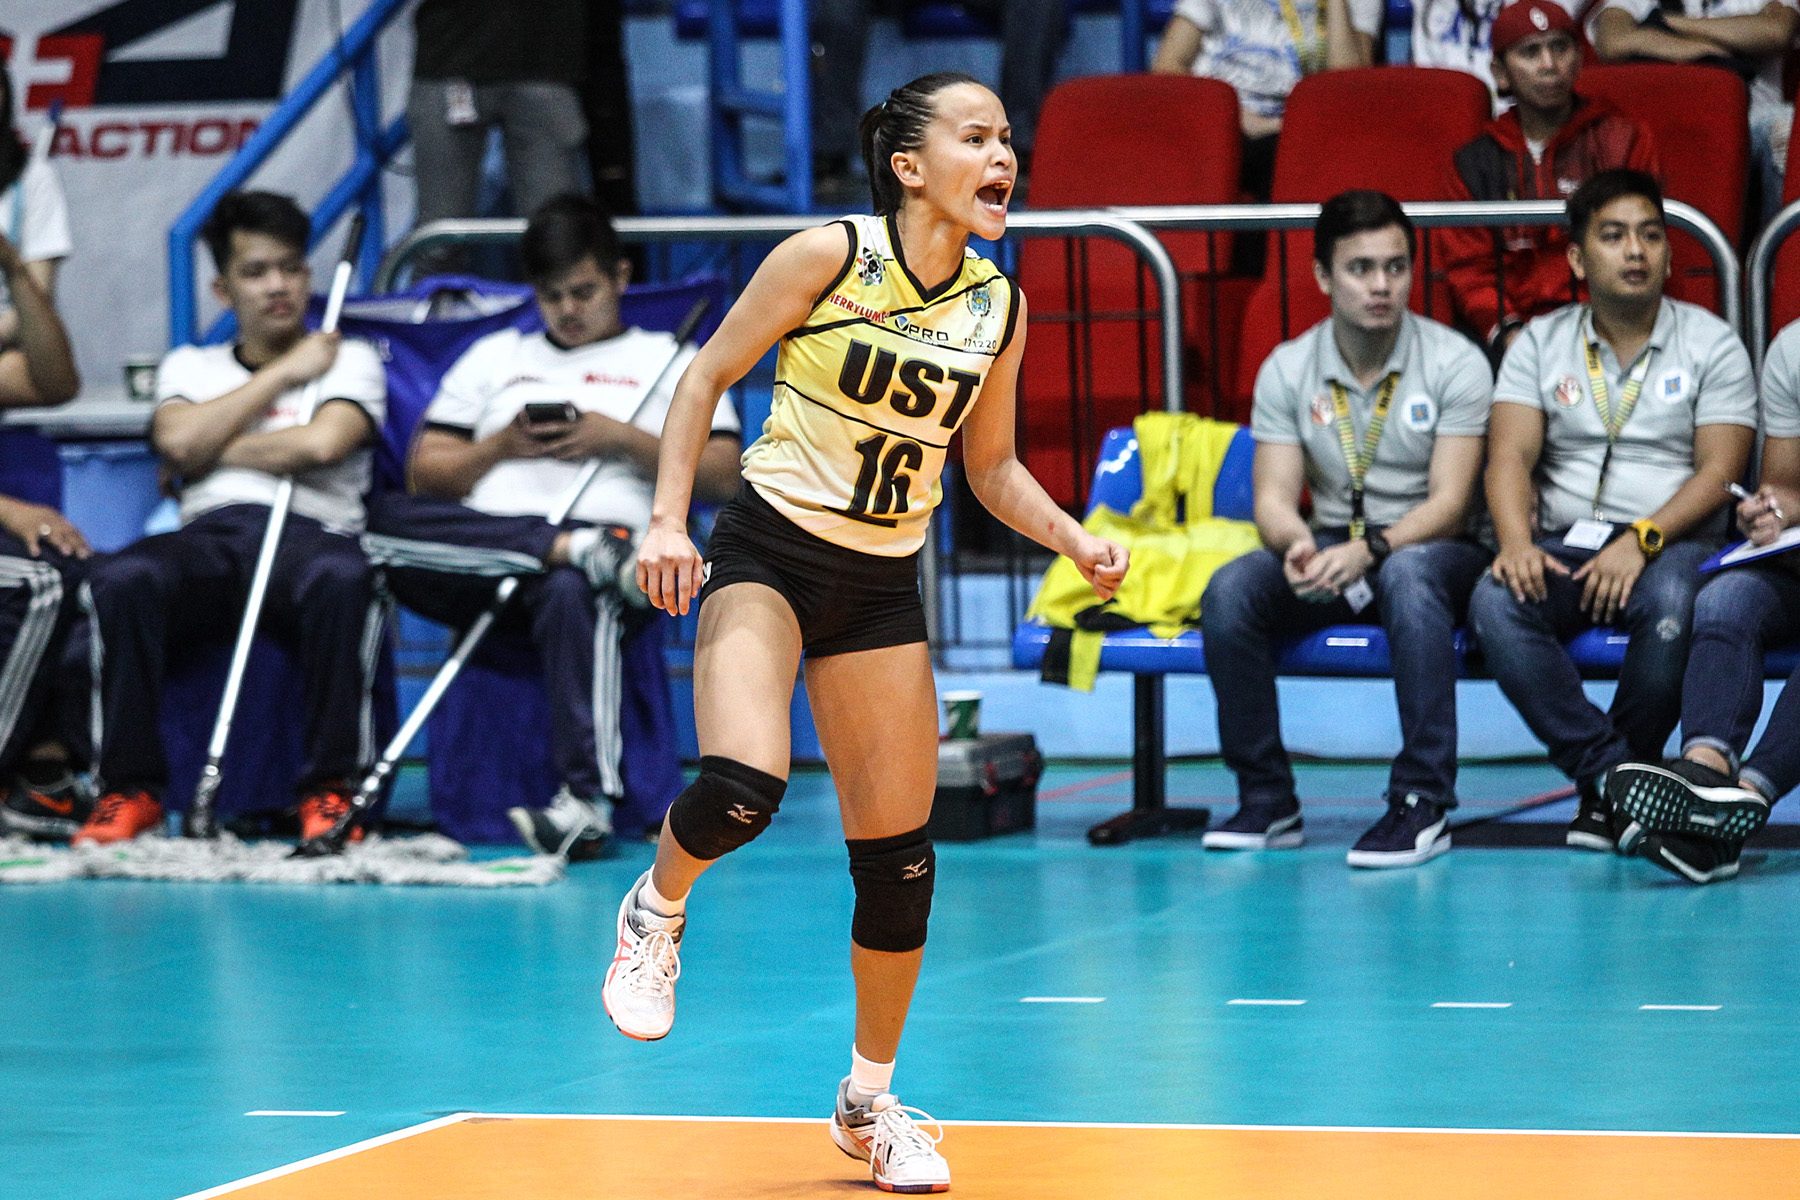 ONE LAST PUSH. UST will rely on usuals such as Cherry Rondina as it makes one last push for a long-awaited Final Four return. File Photo by Josh Albelda/Rappler  